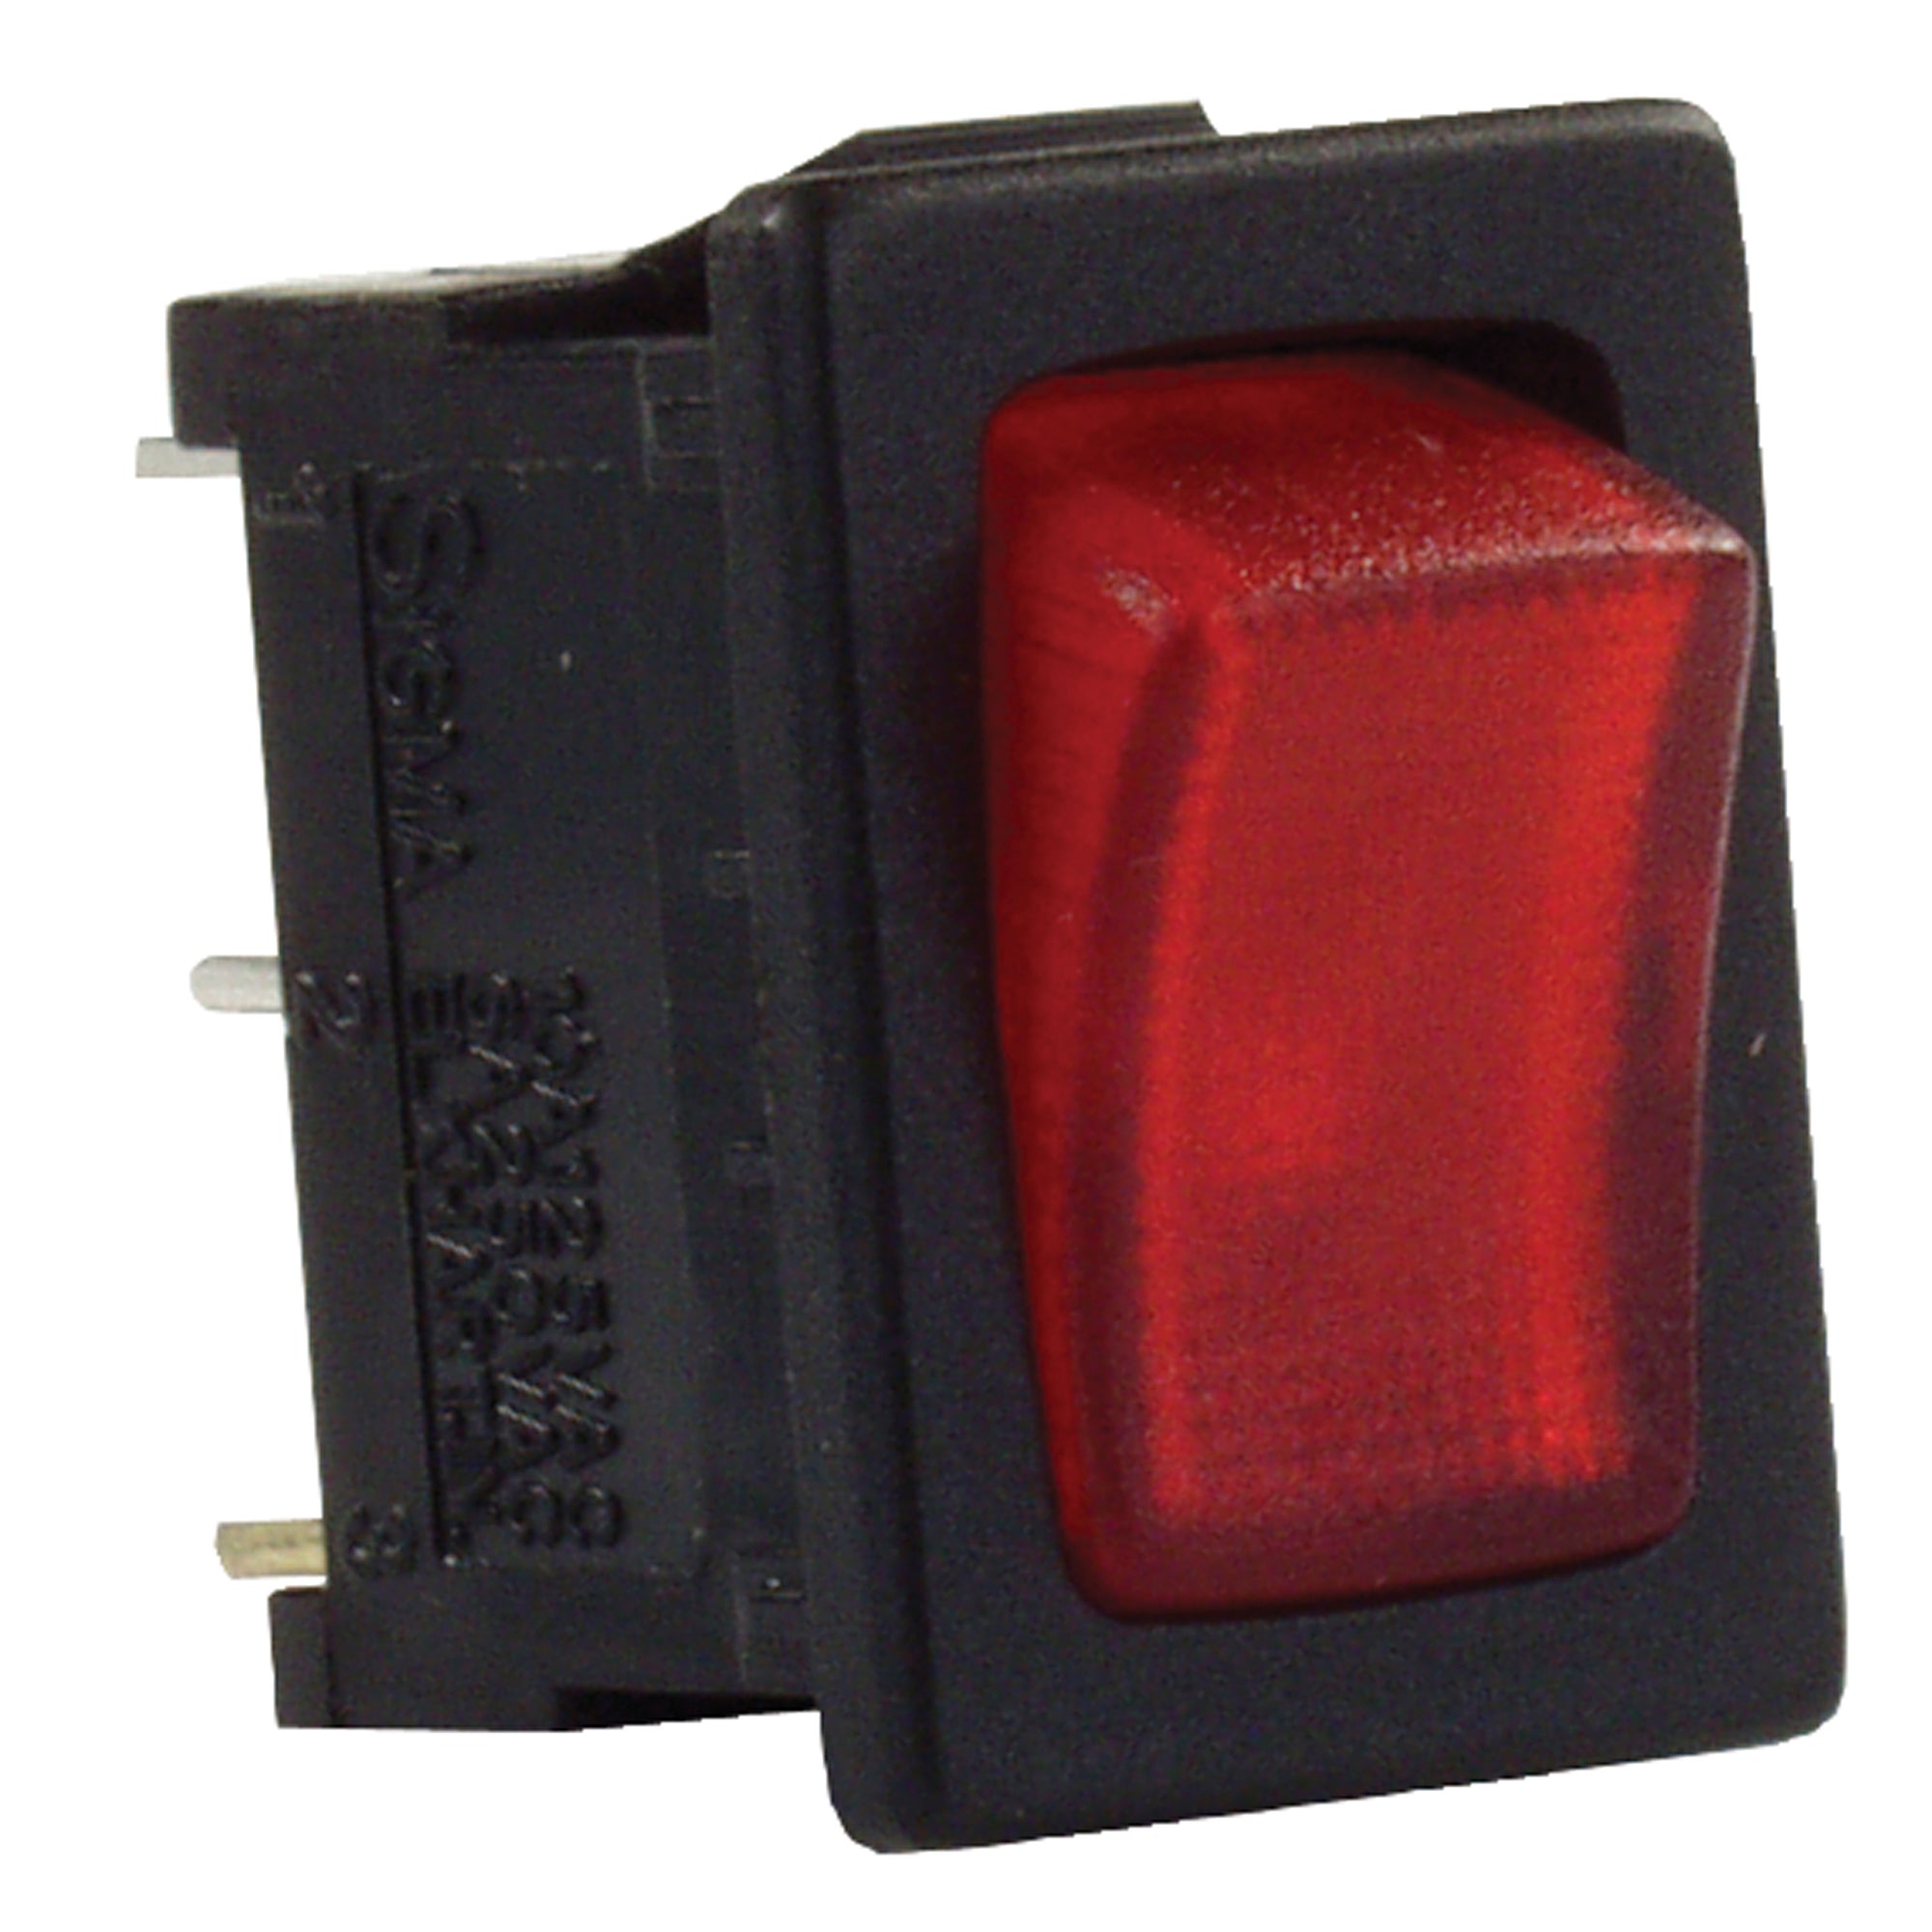 JR Products 12765 Mini-Illuminated On/Off Switch - Red/Black